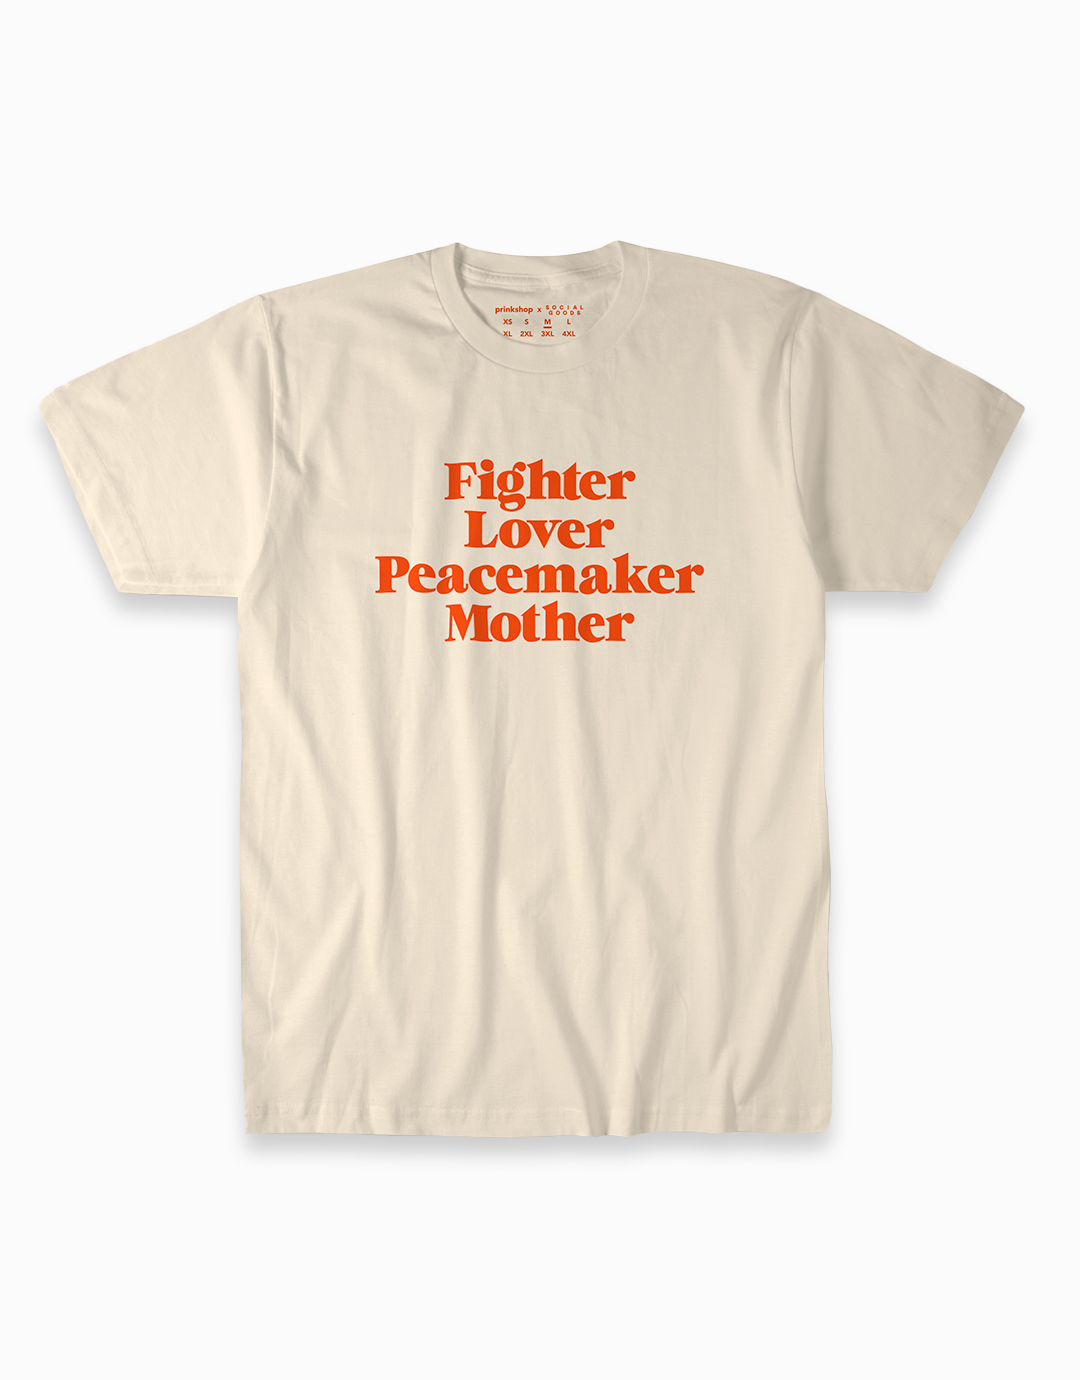 Fighter Lover Peacemaker Mother T-Shirt